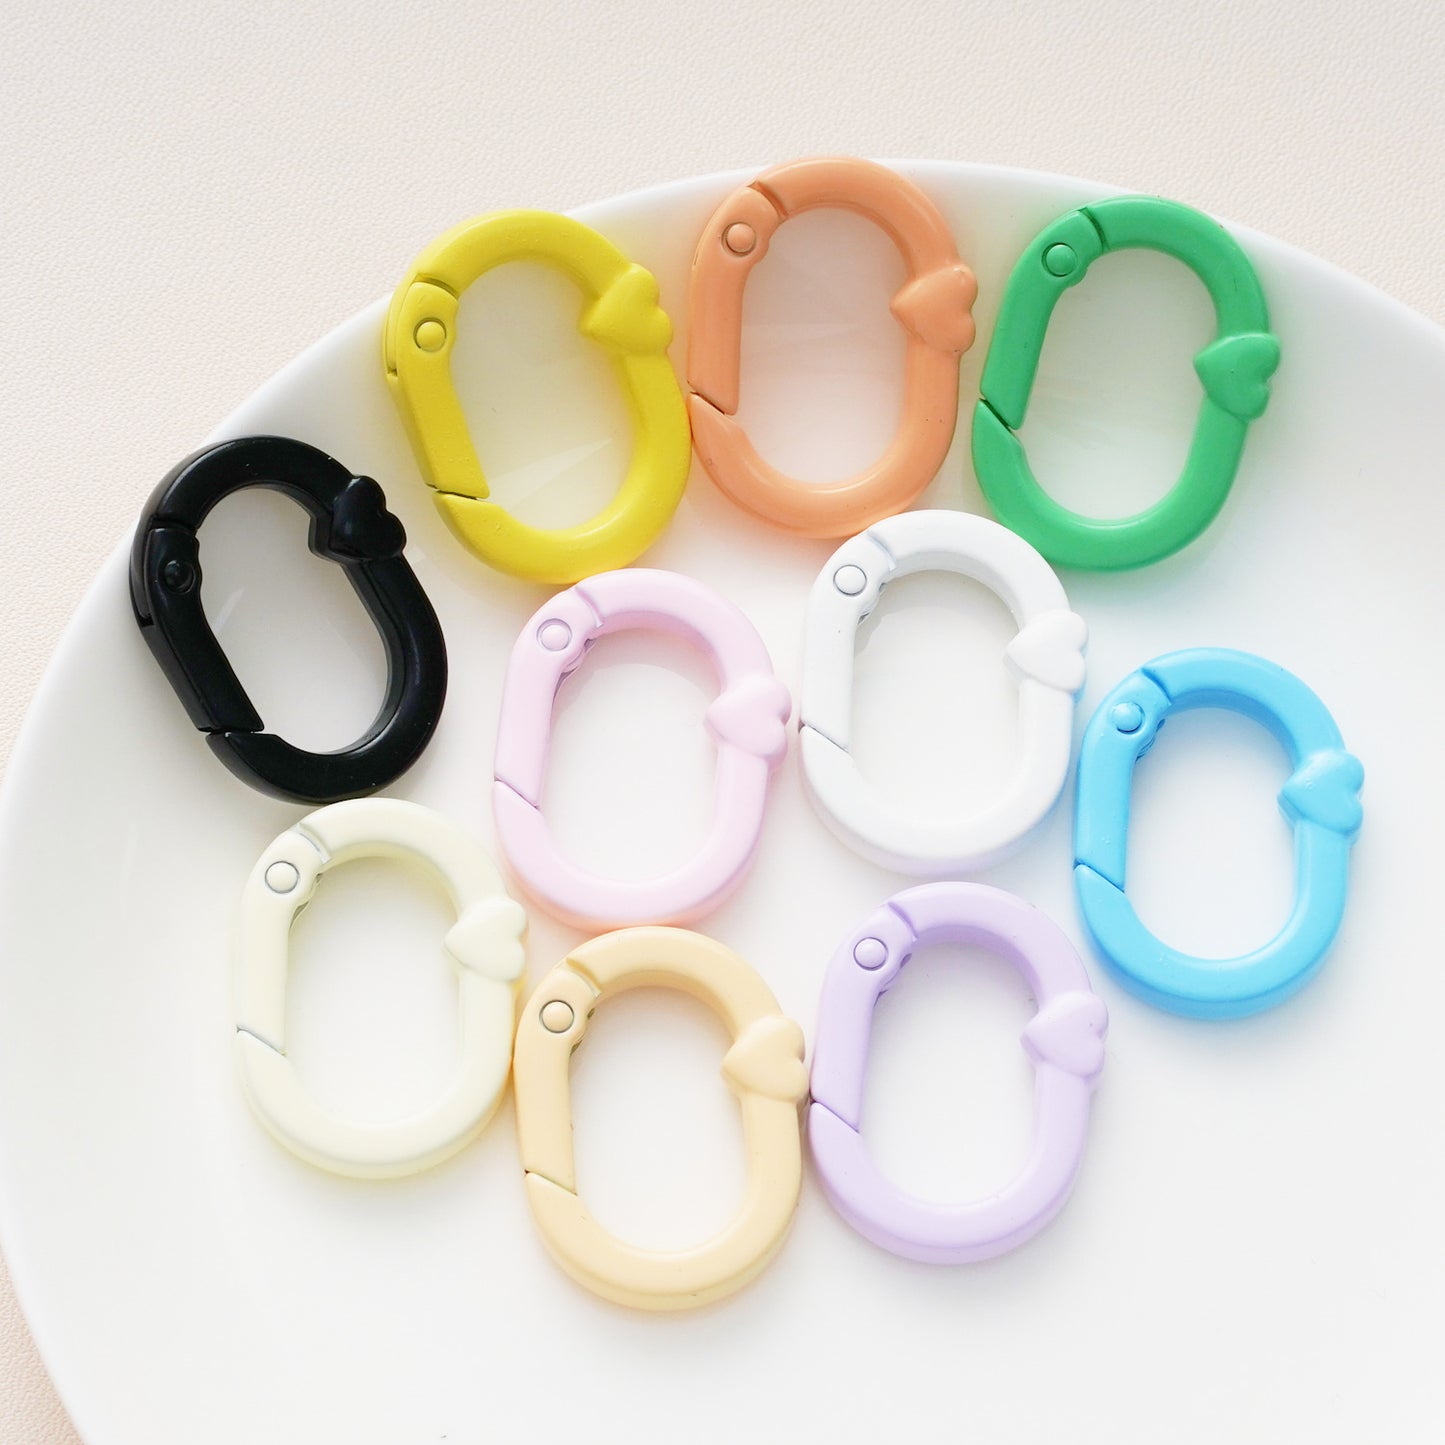 20 Pieces Heart Oval Shape Ring Buckle for DIY Keychain Phone Chain